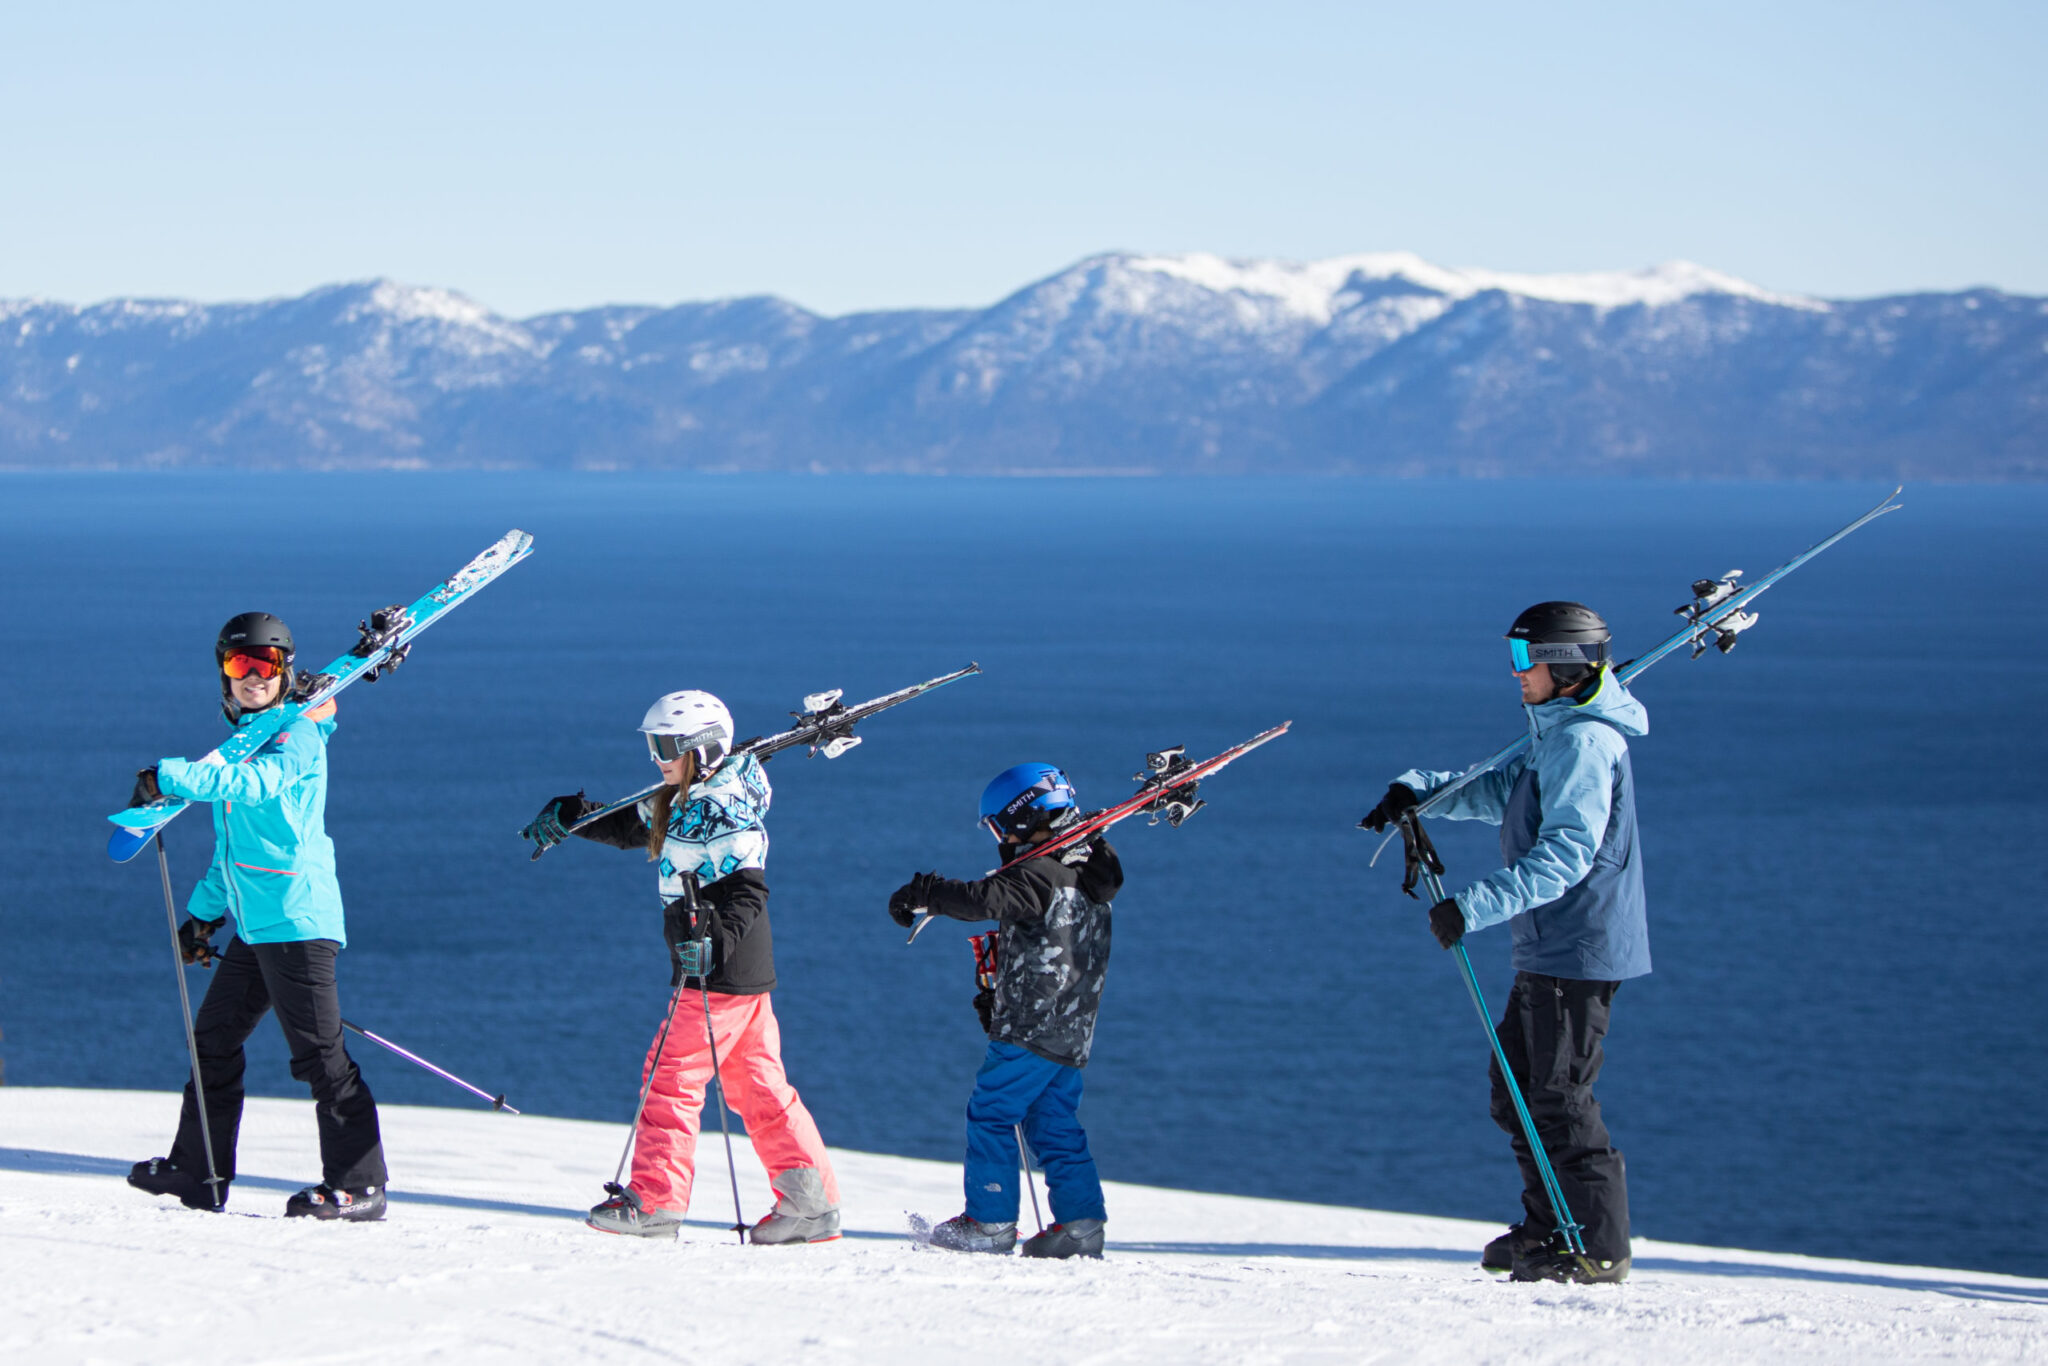 Family skiing together with tahoe view in background